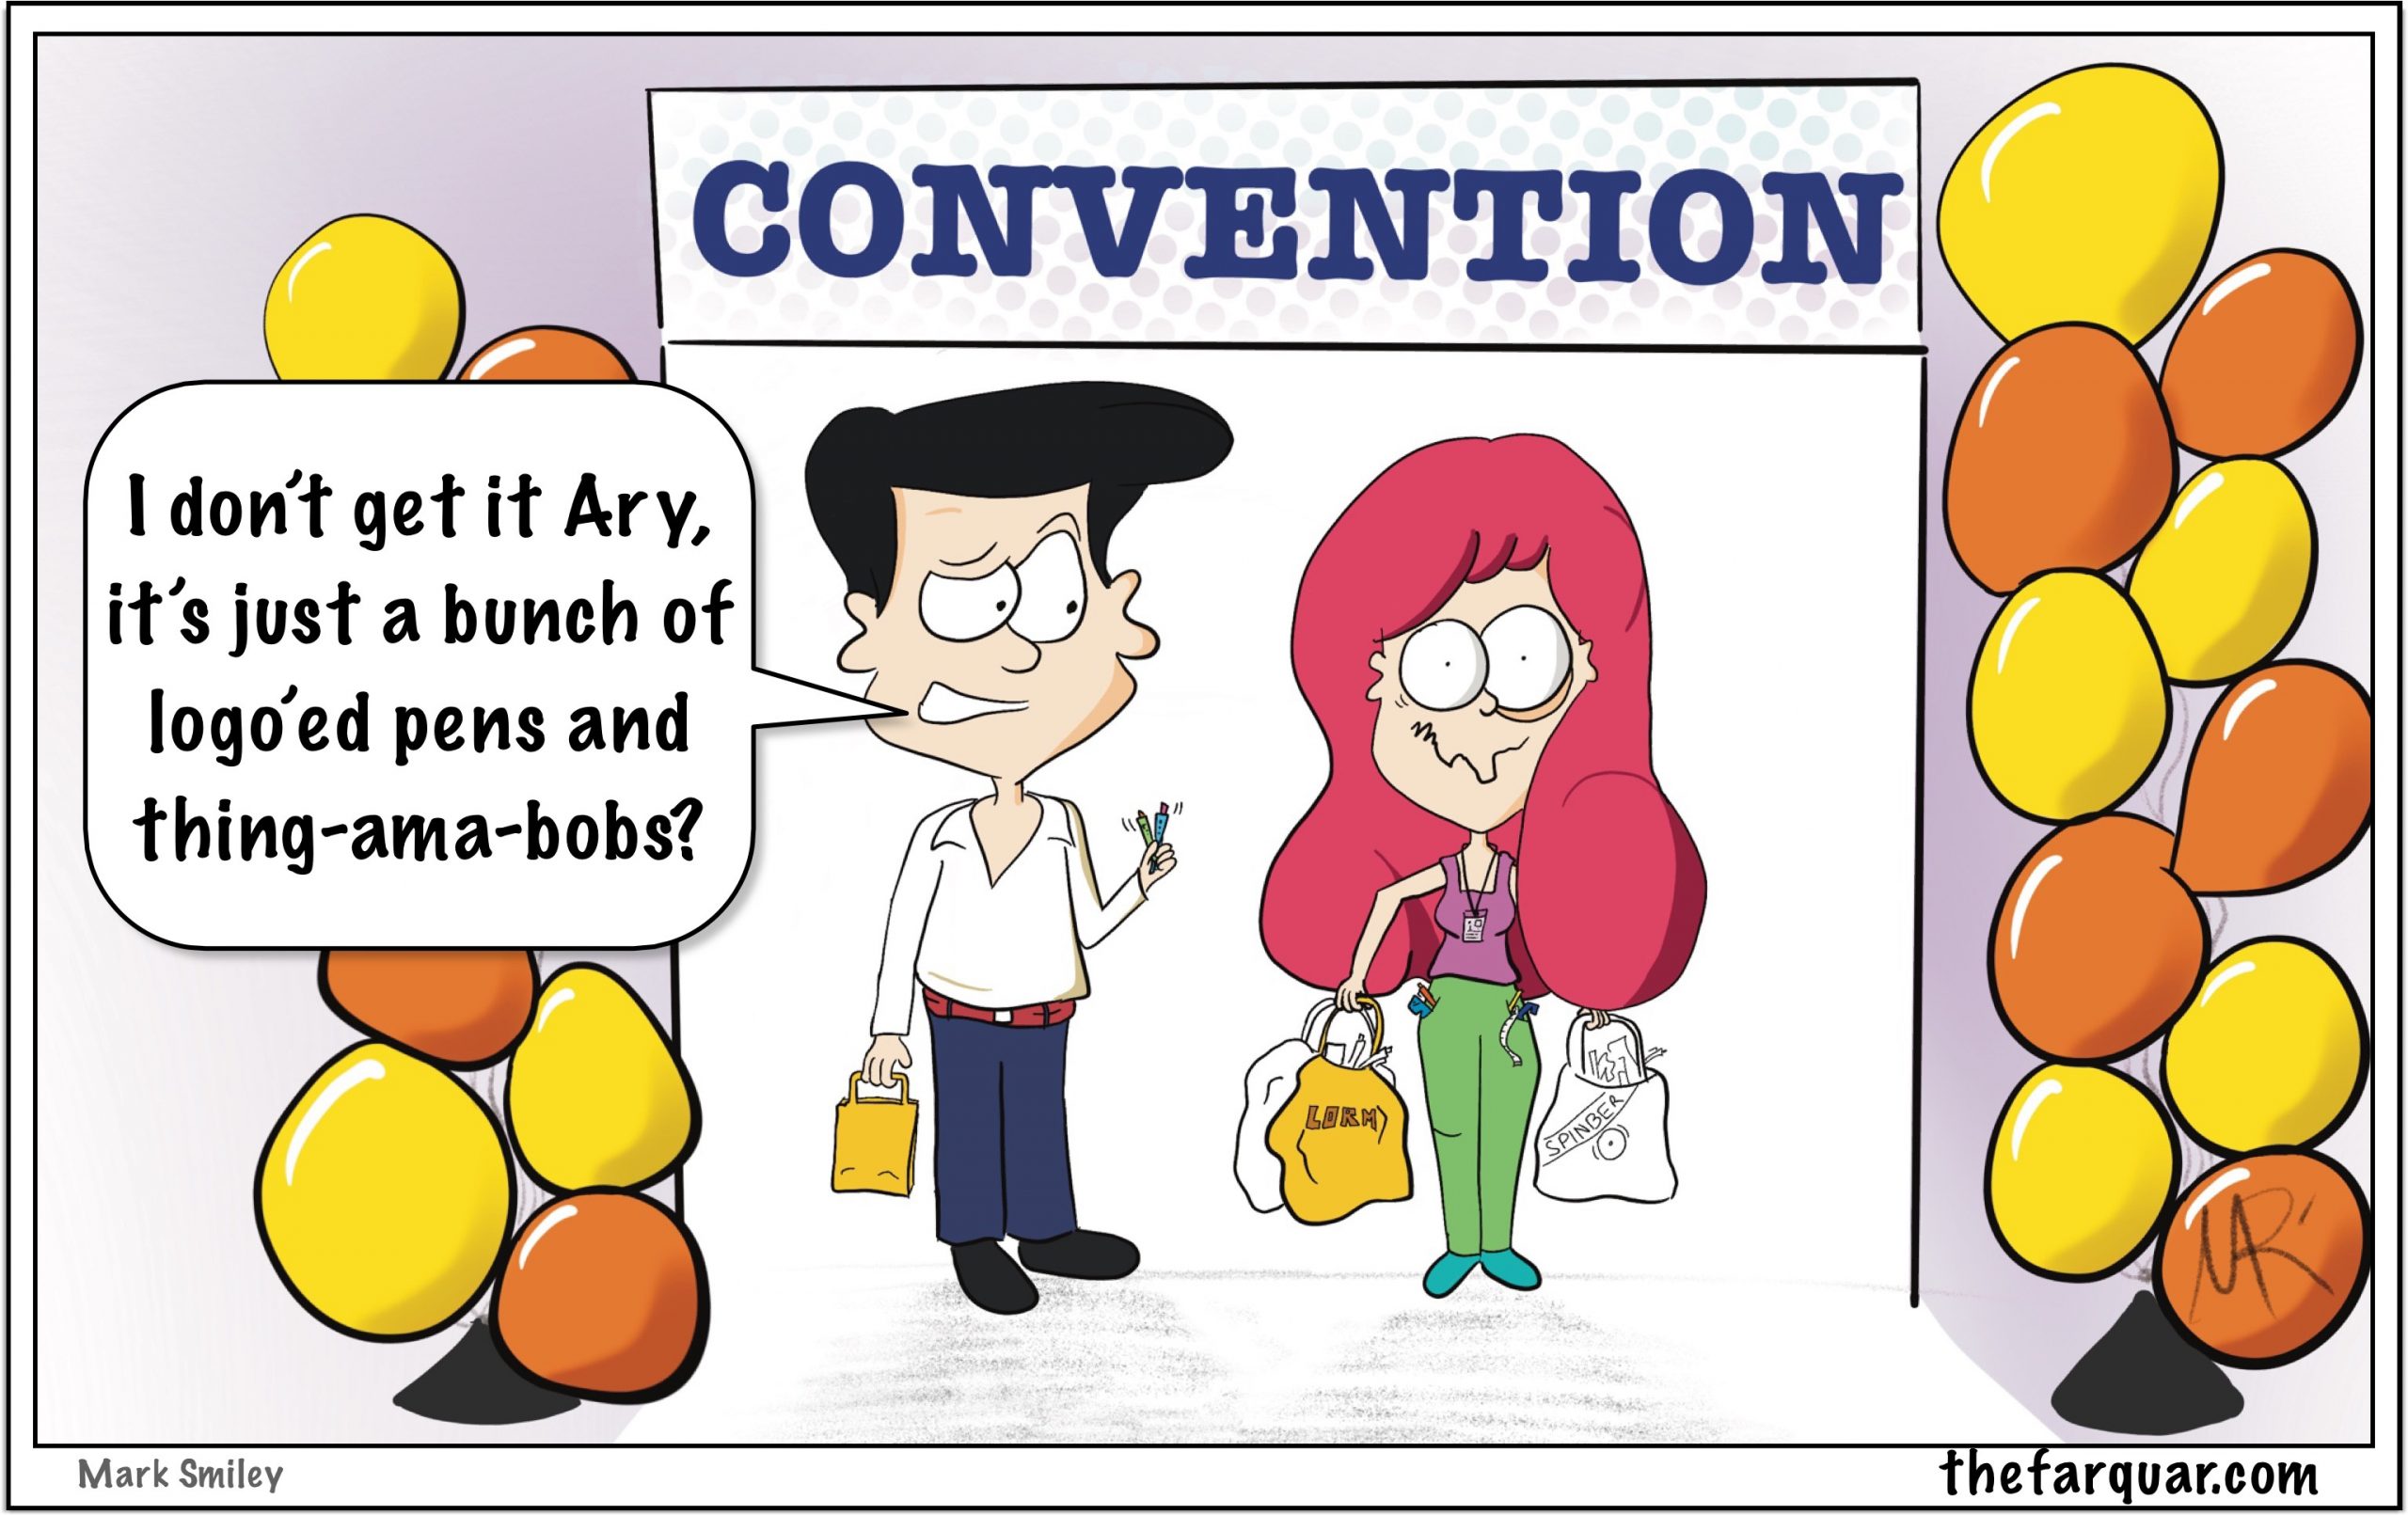 Ariel discovers Convention Swag